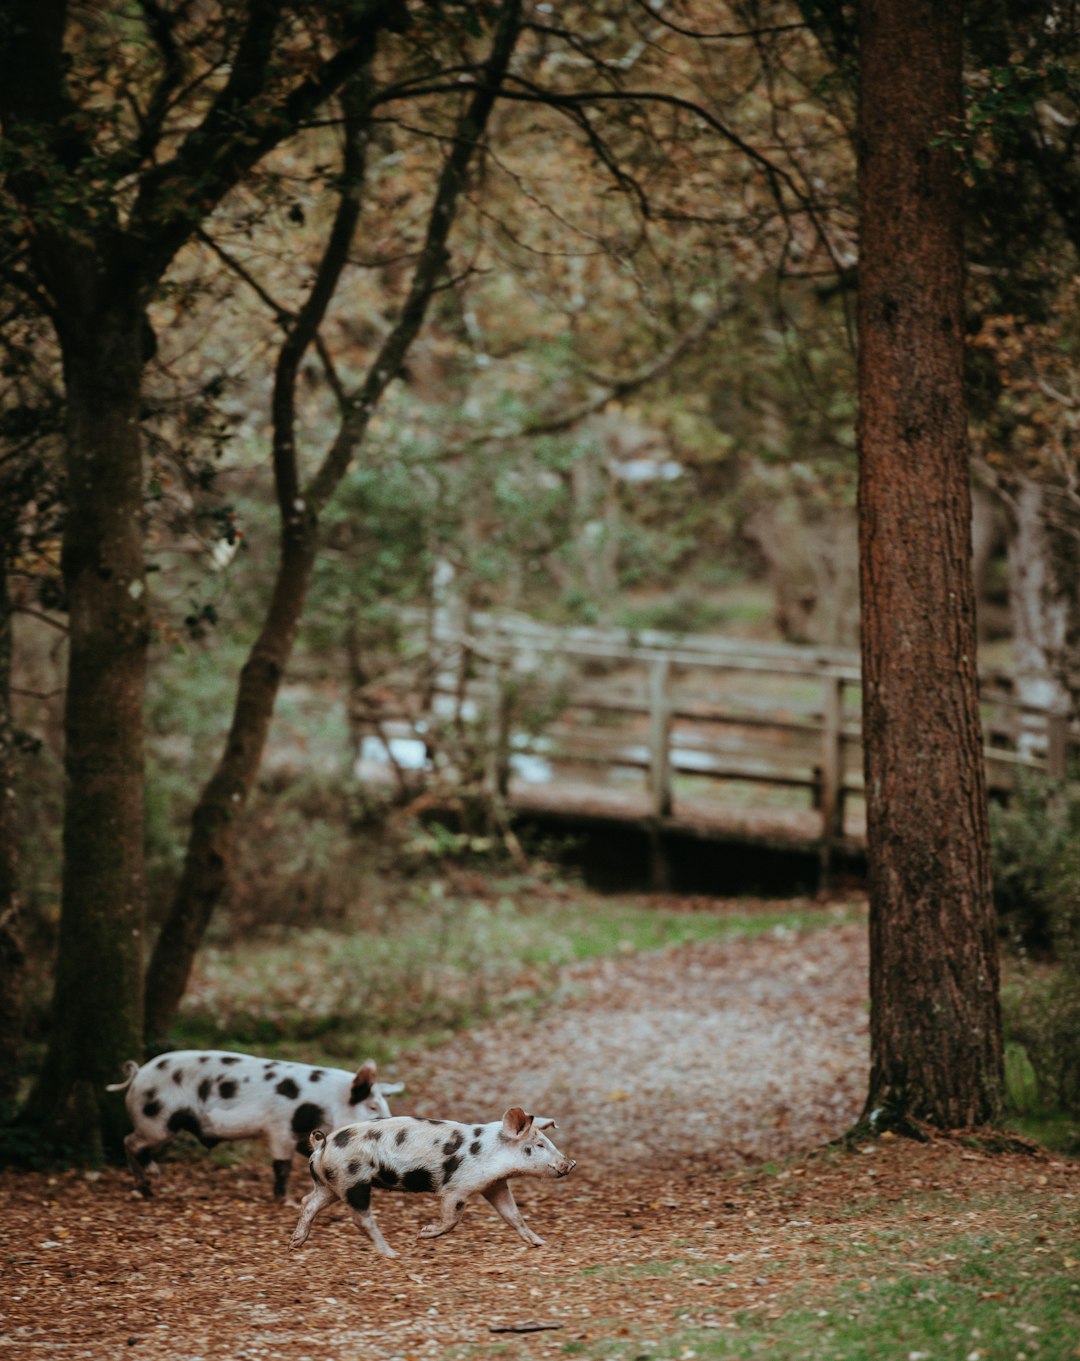 two white-and-black pigs walking near trees during daytime